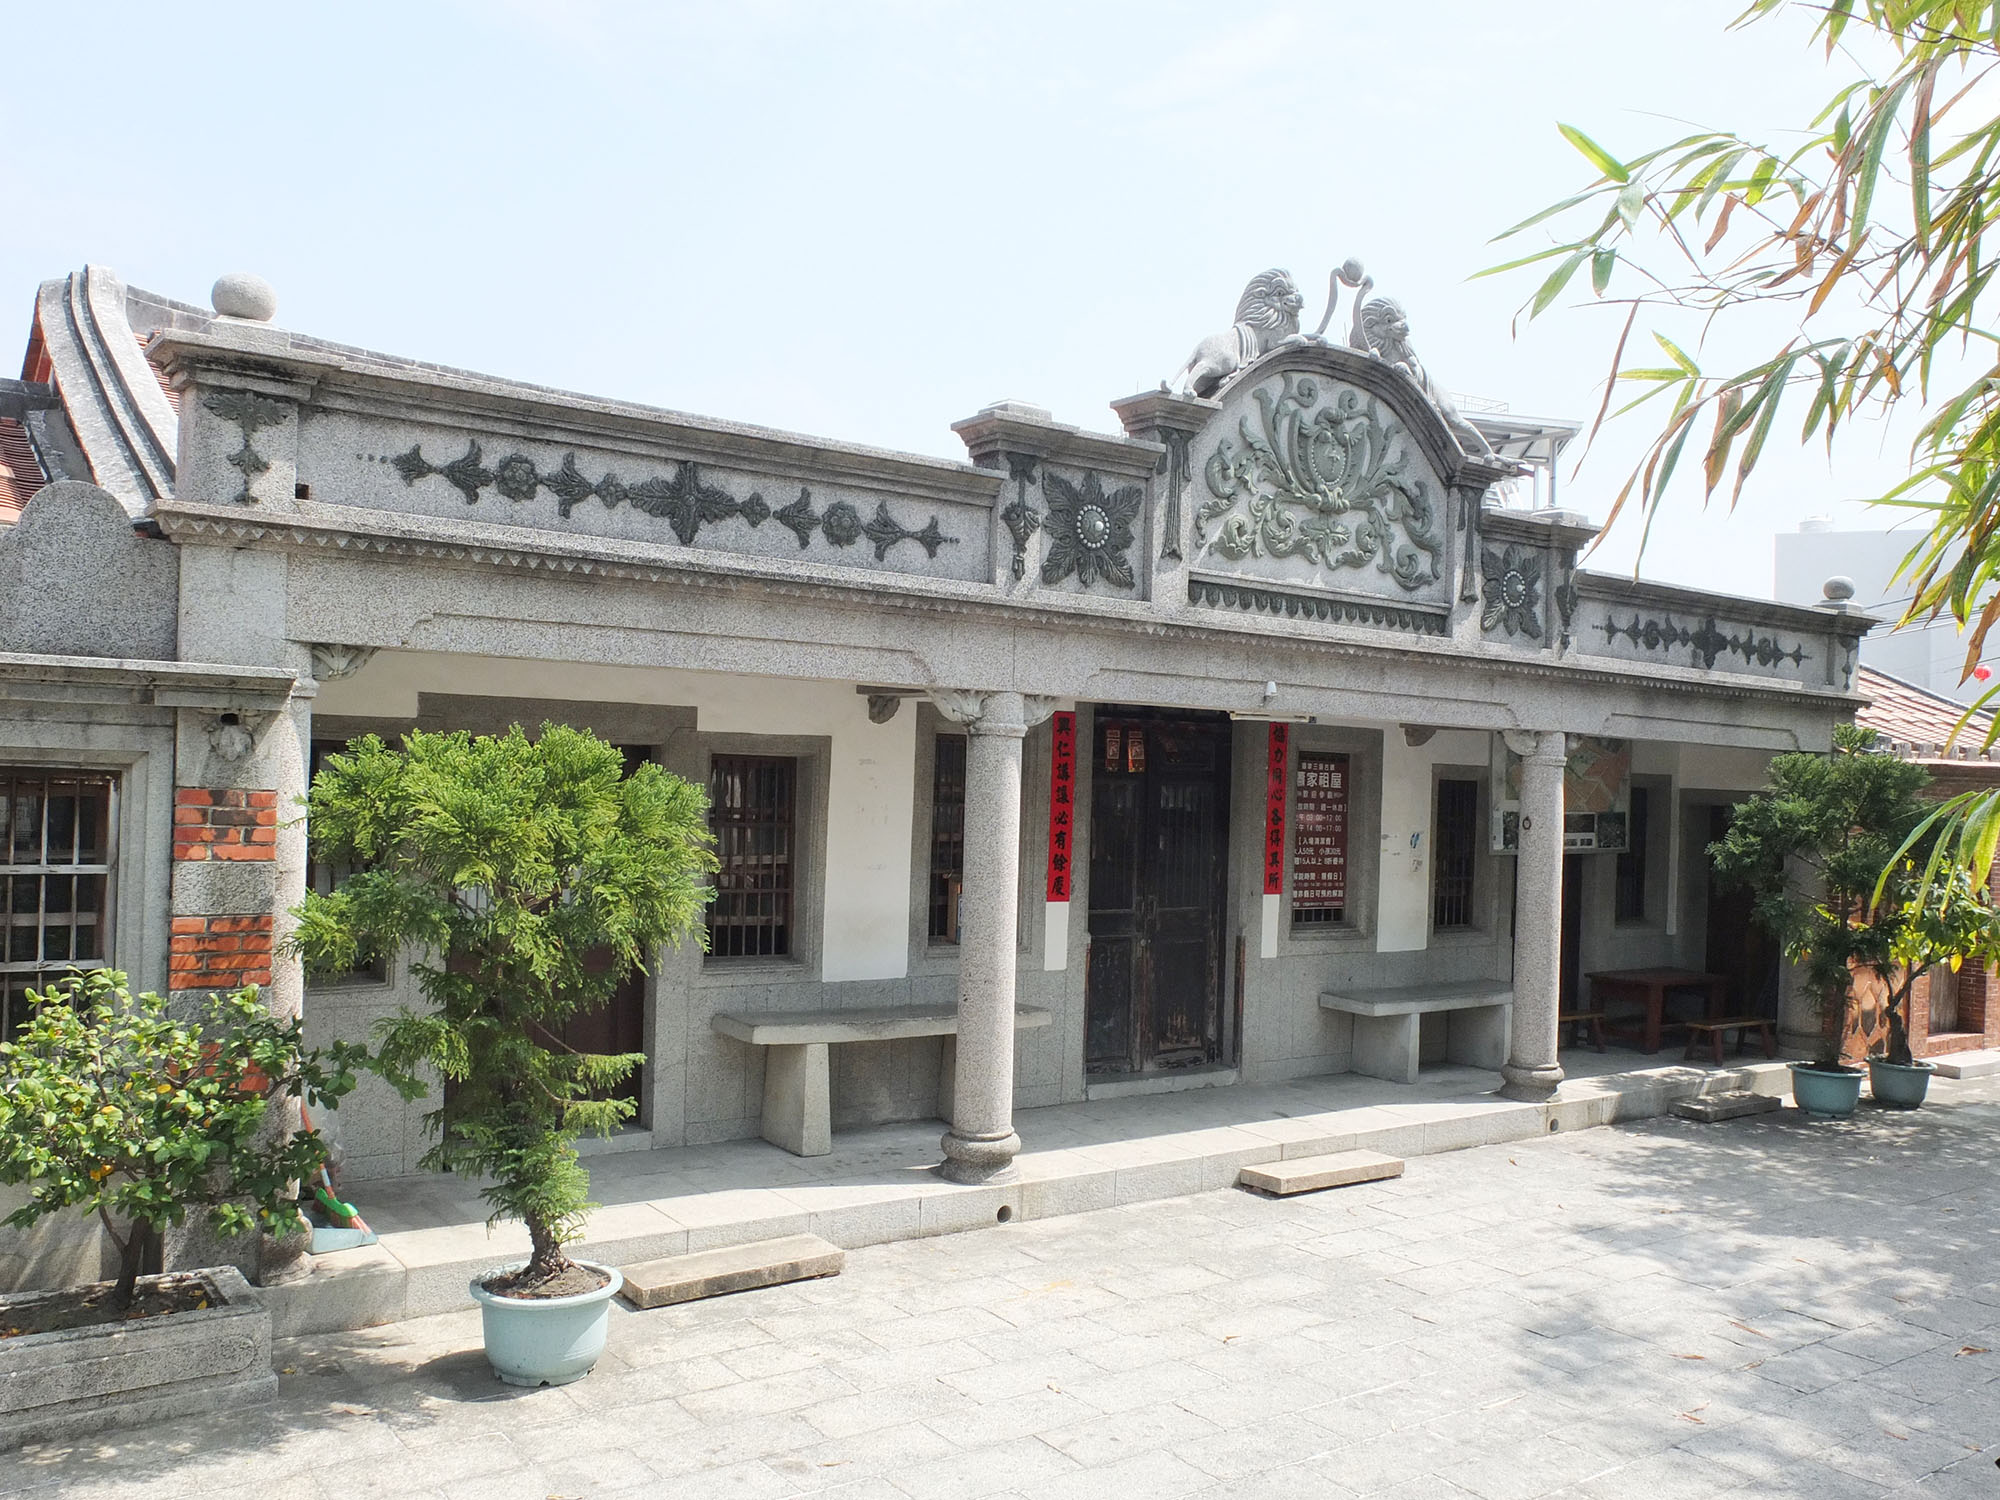 The Xiao Family Ancestral Home